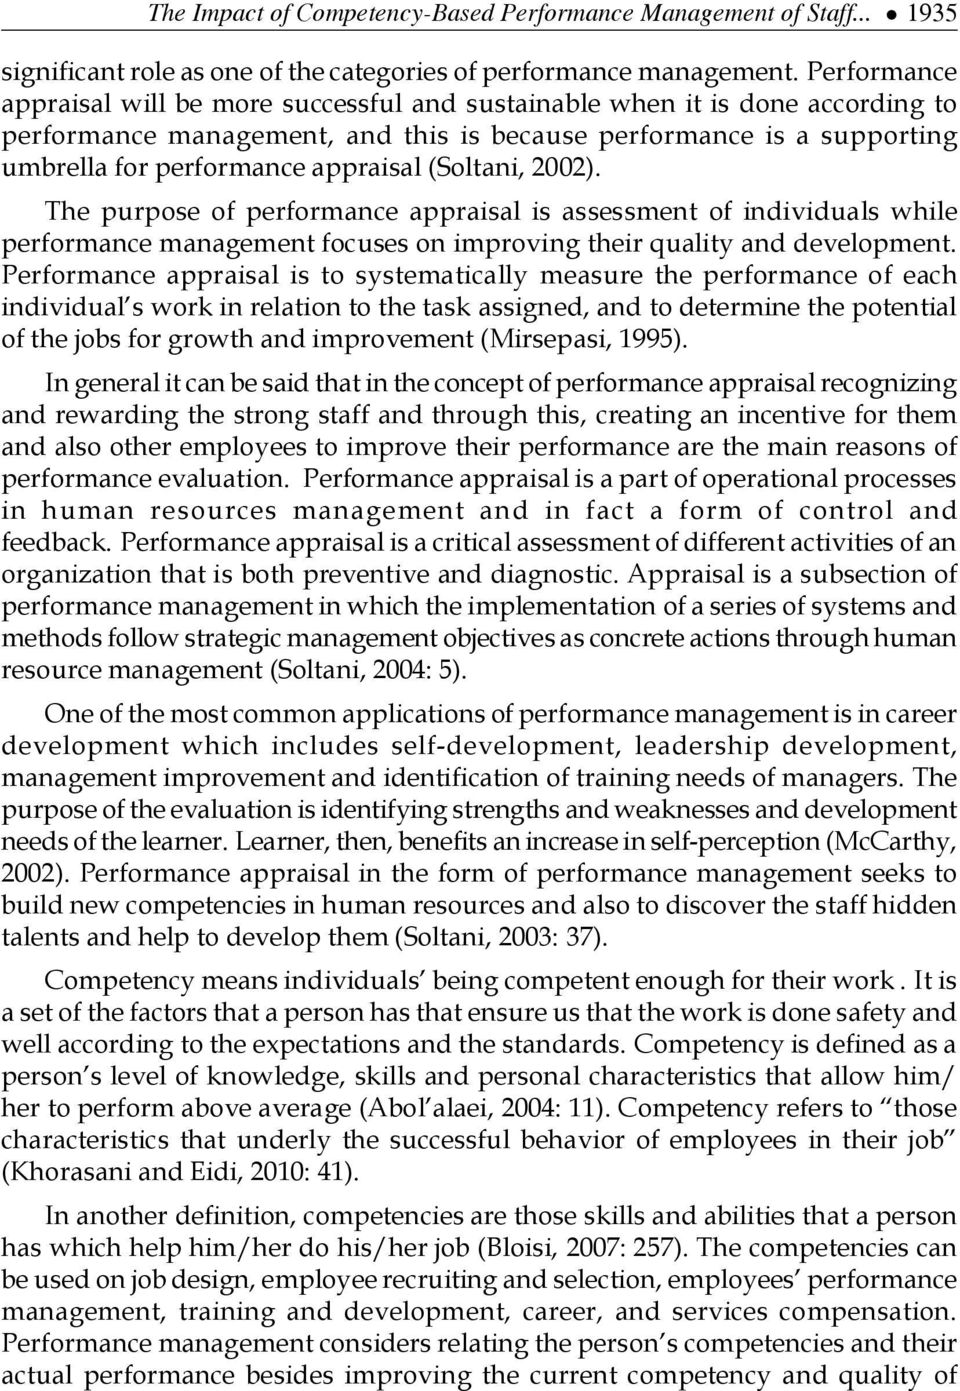 (Soltani, 2002). The purpose of performance appraisal is assessment of individuals while performance management focuses on improving their quality and development.